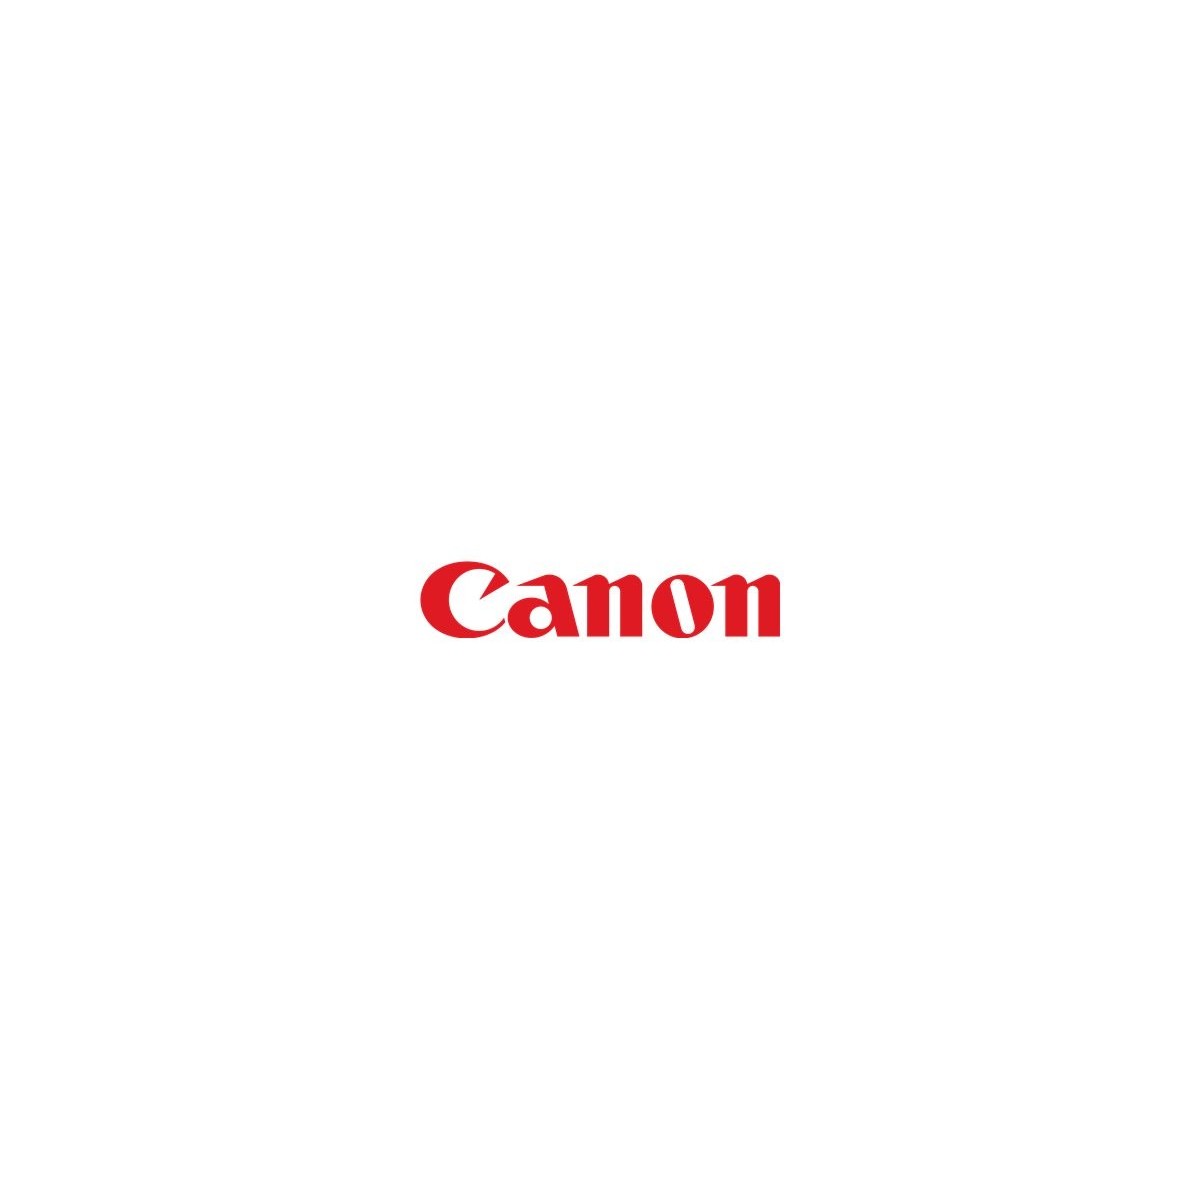 Canon Laser/scanner ASS'Y